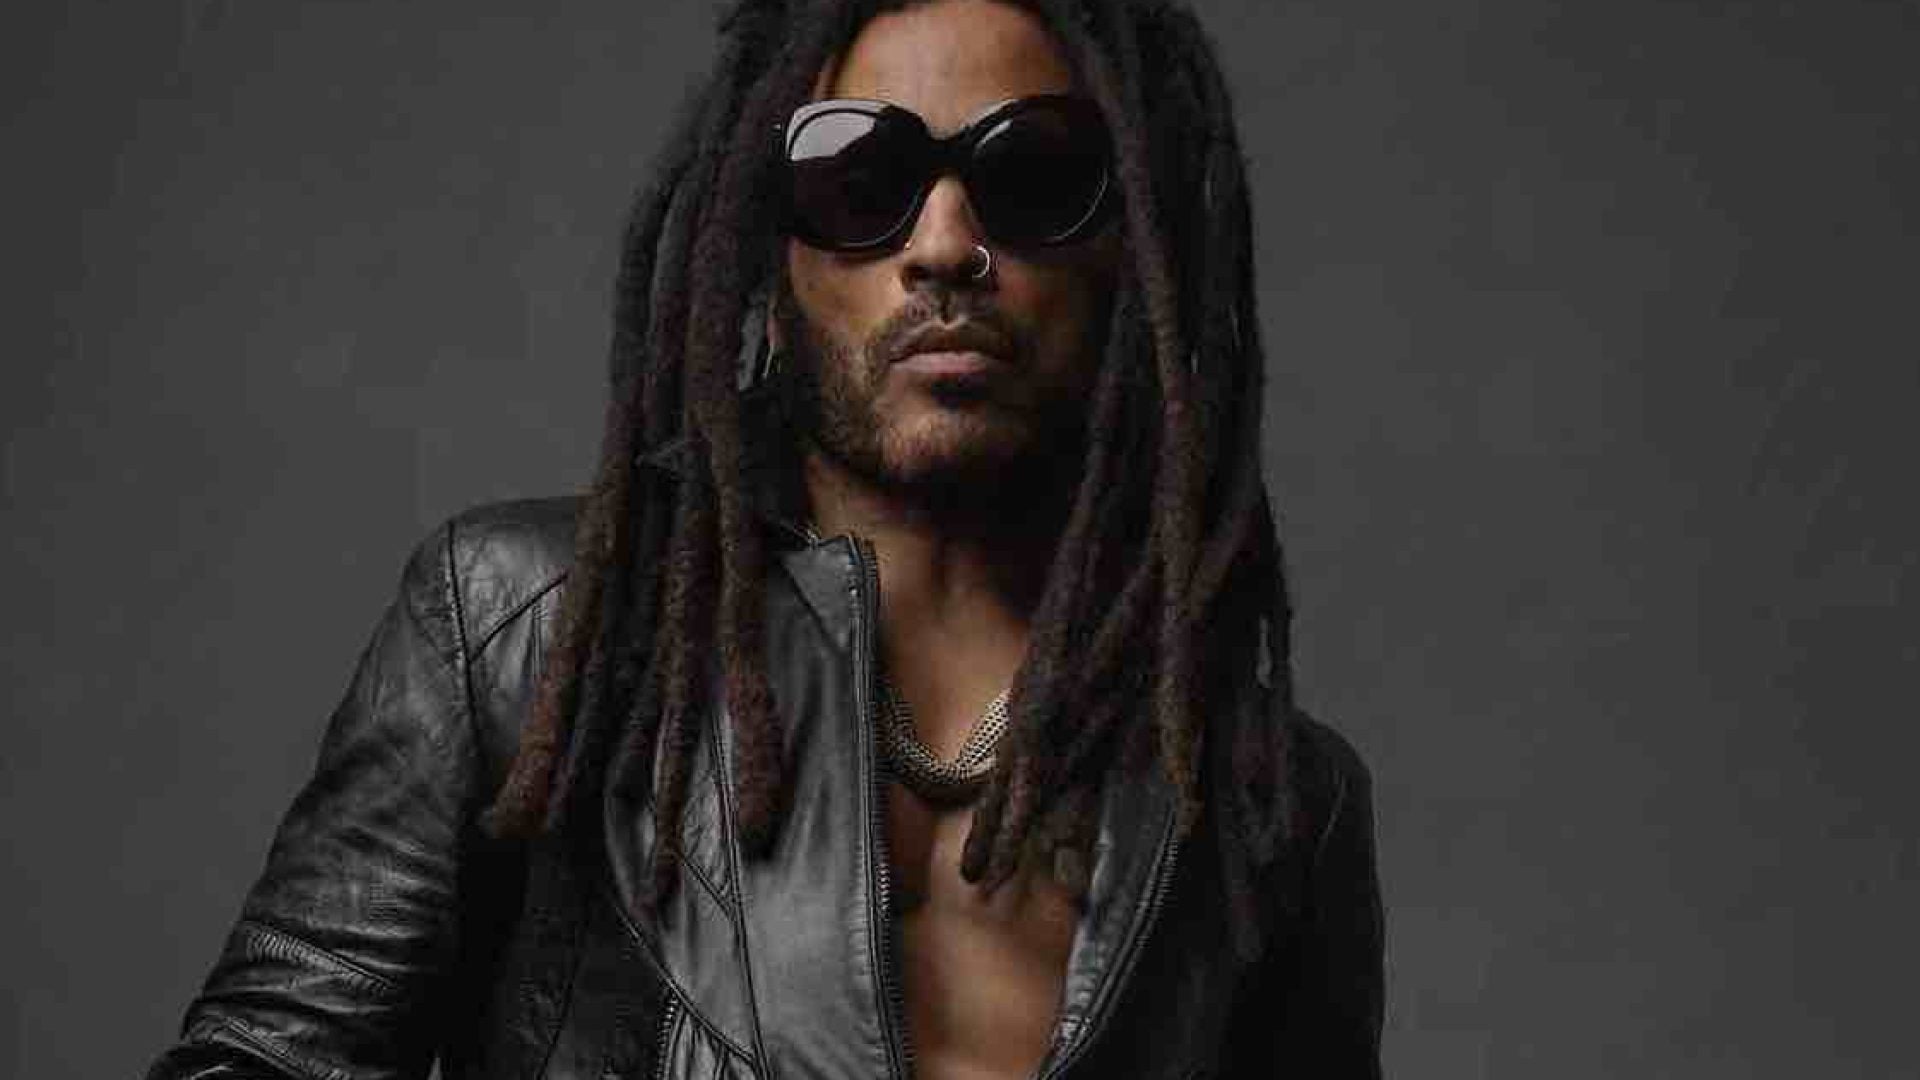 How Lenny Kravitz Captured the 'Human' Experience After 6 Years Away From Music